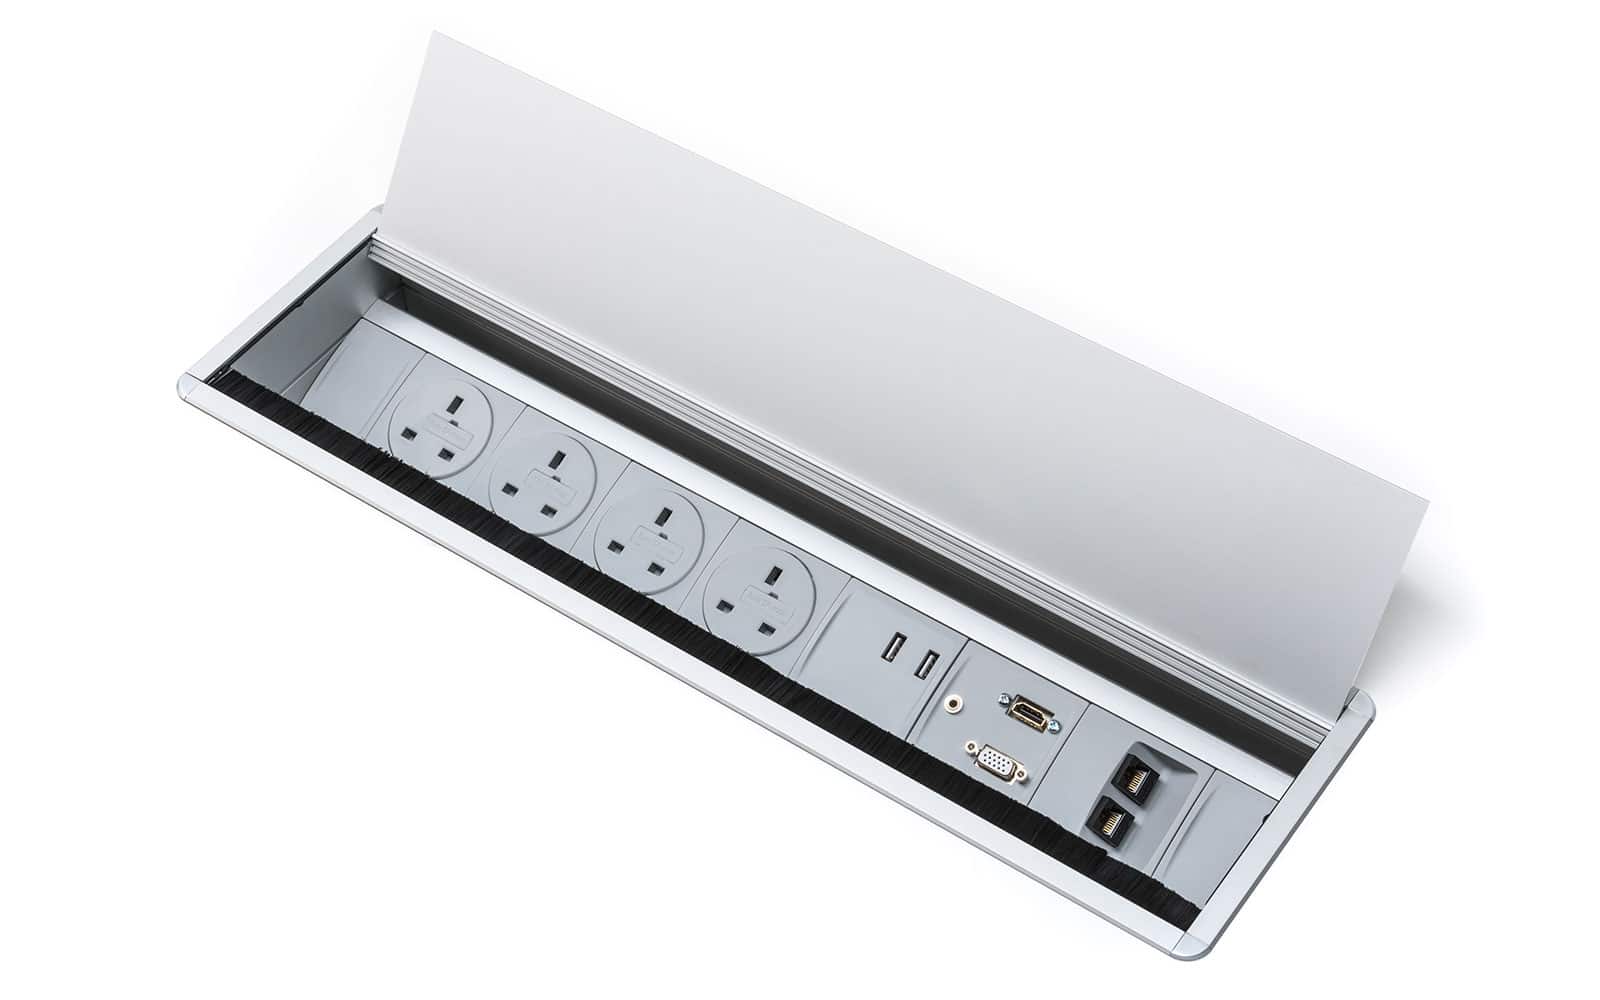 Access is a premium in-desk power module made with an all metal surround and lid. Discreetly covers any clutter while allowing cables to neatly pass onto the work surface.